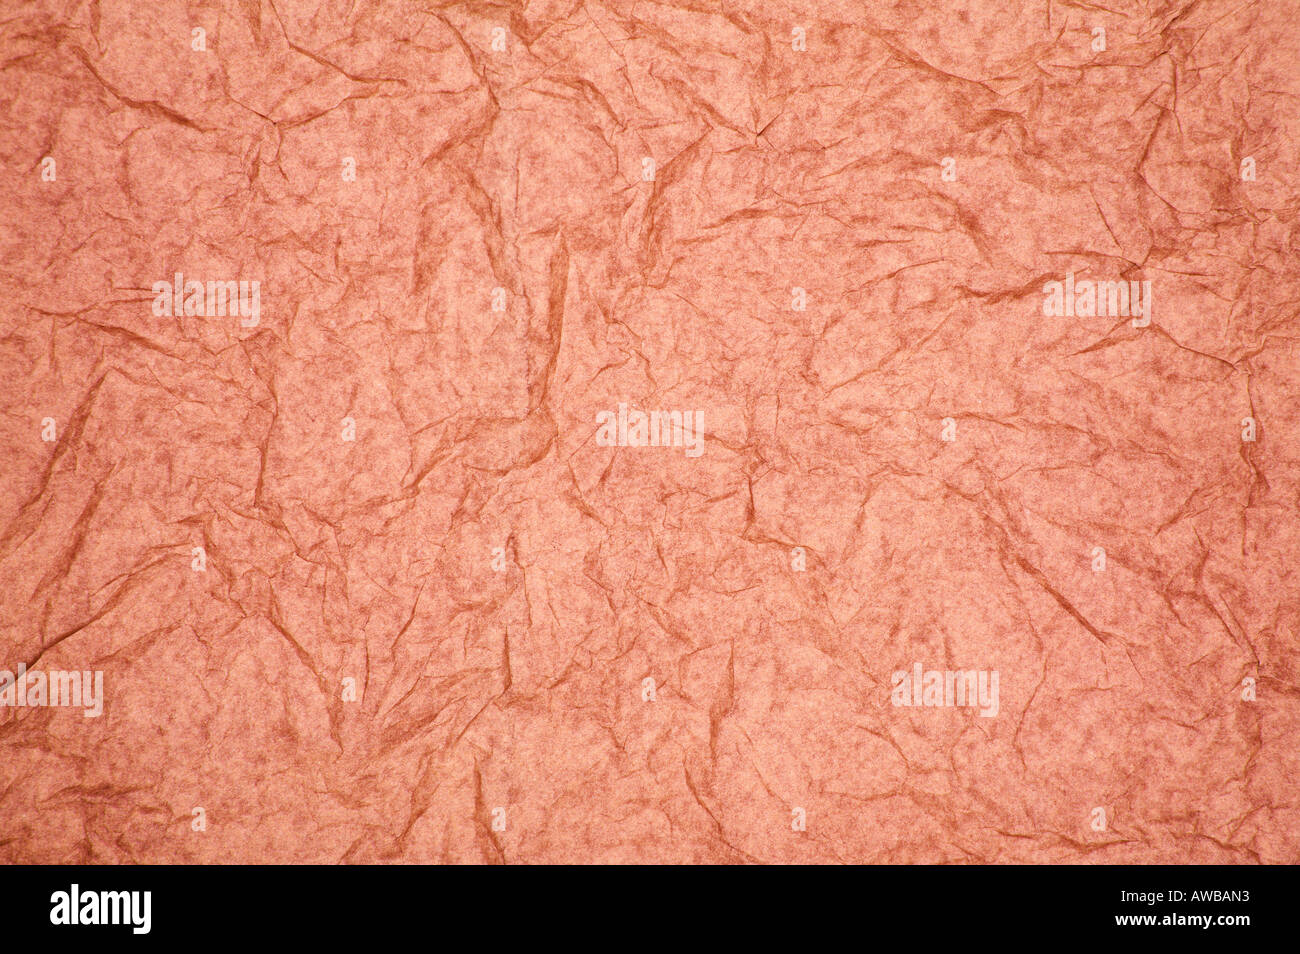 ABSTRACT RANDOM BACKGROUND OF CREASED CRUMPLED PALE RED TISSUE PAPER Stock Photo